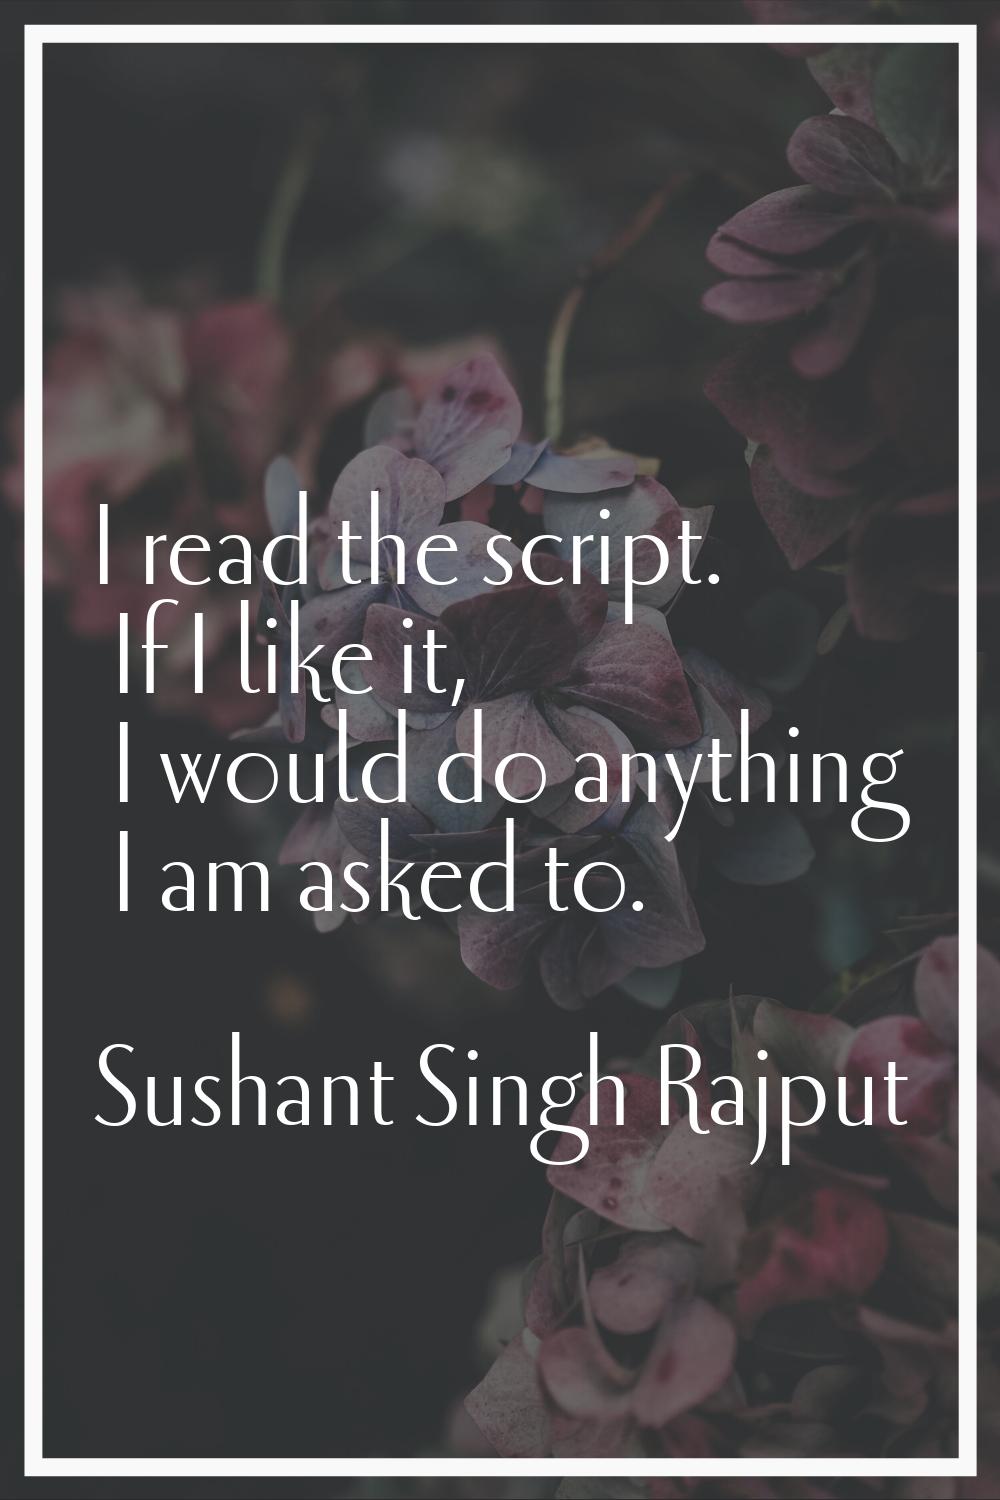 I read the script. If I like it, I would do anything I am asked to.